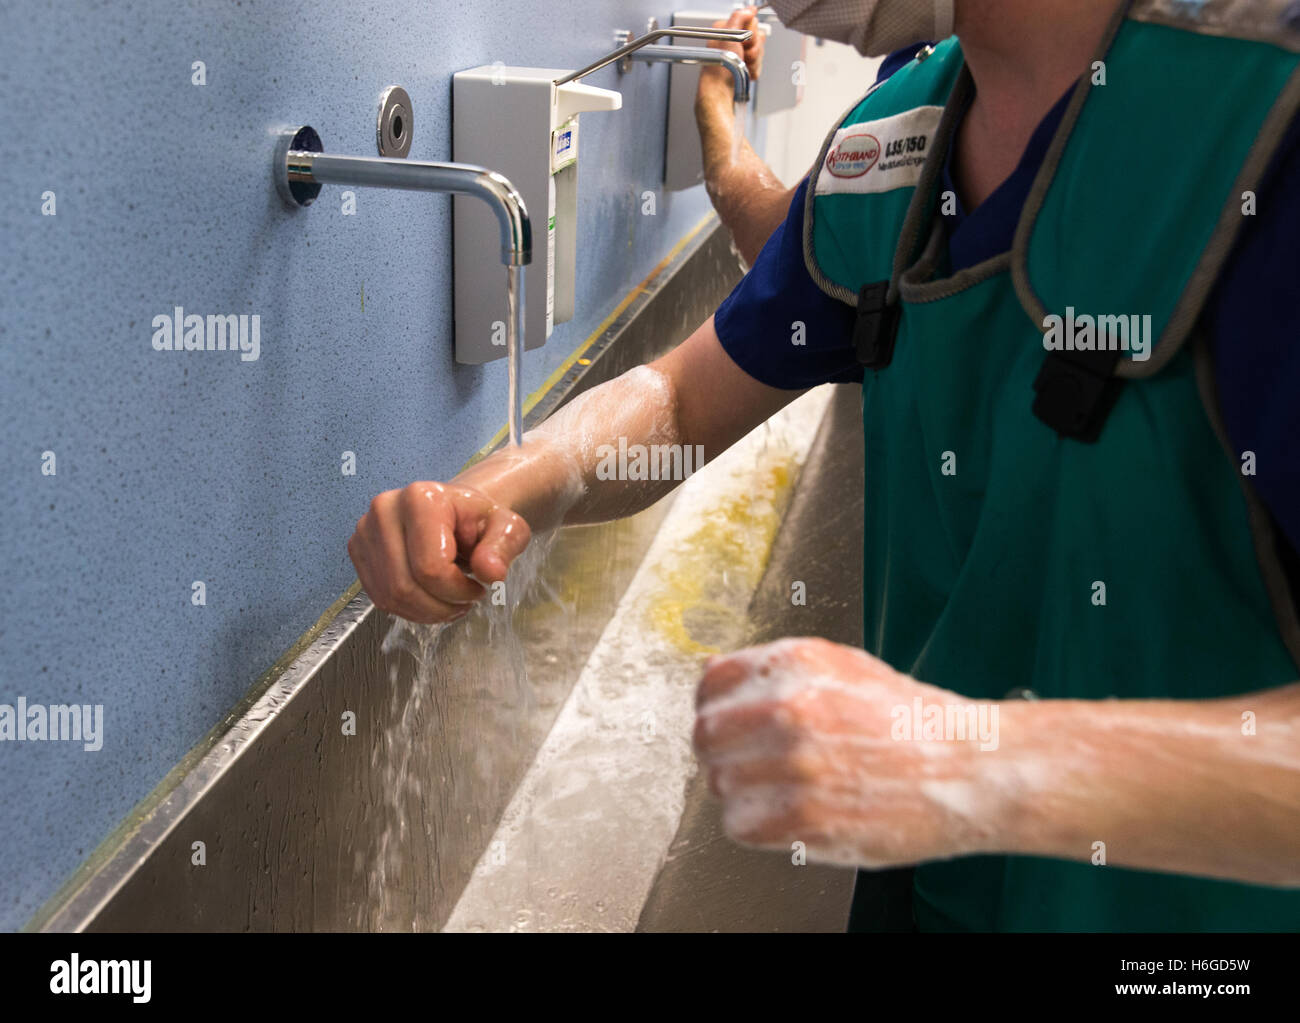 Hospital Surgeon and technician washing hands and arms prior to an operation in the hospital theatre Stock Photo